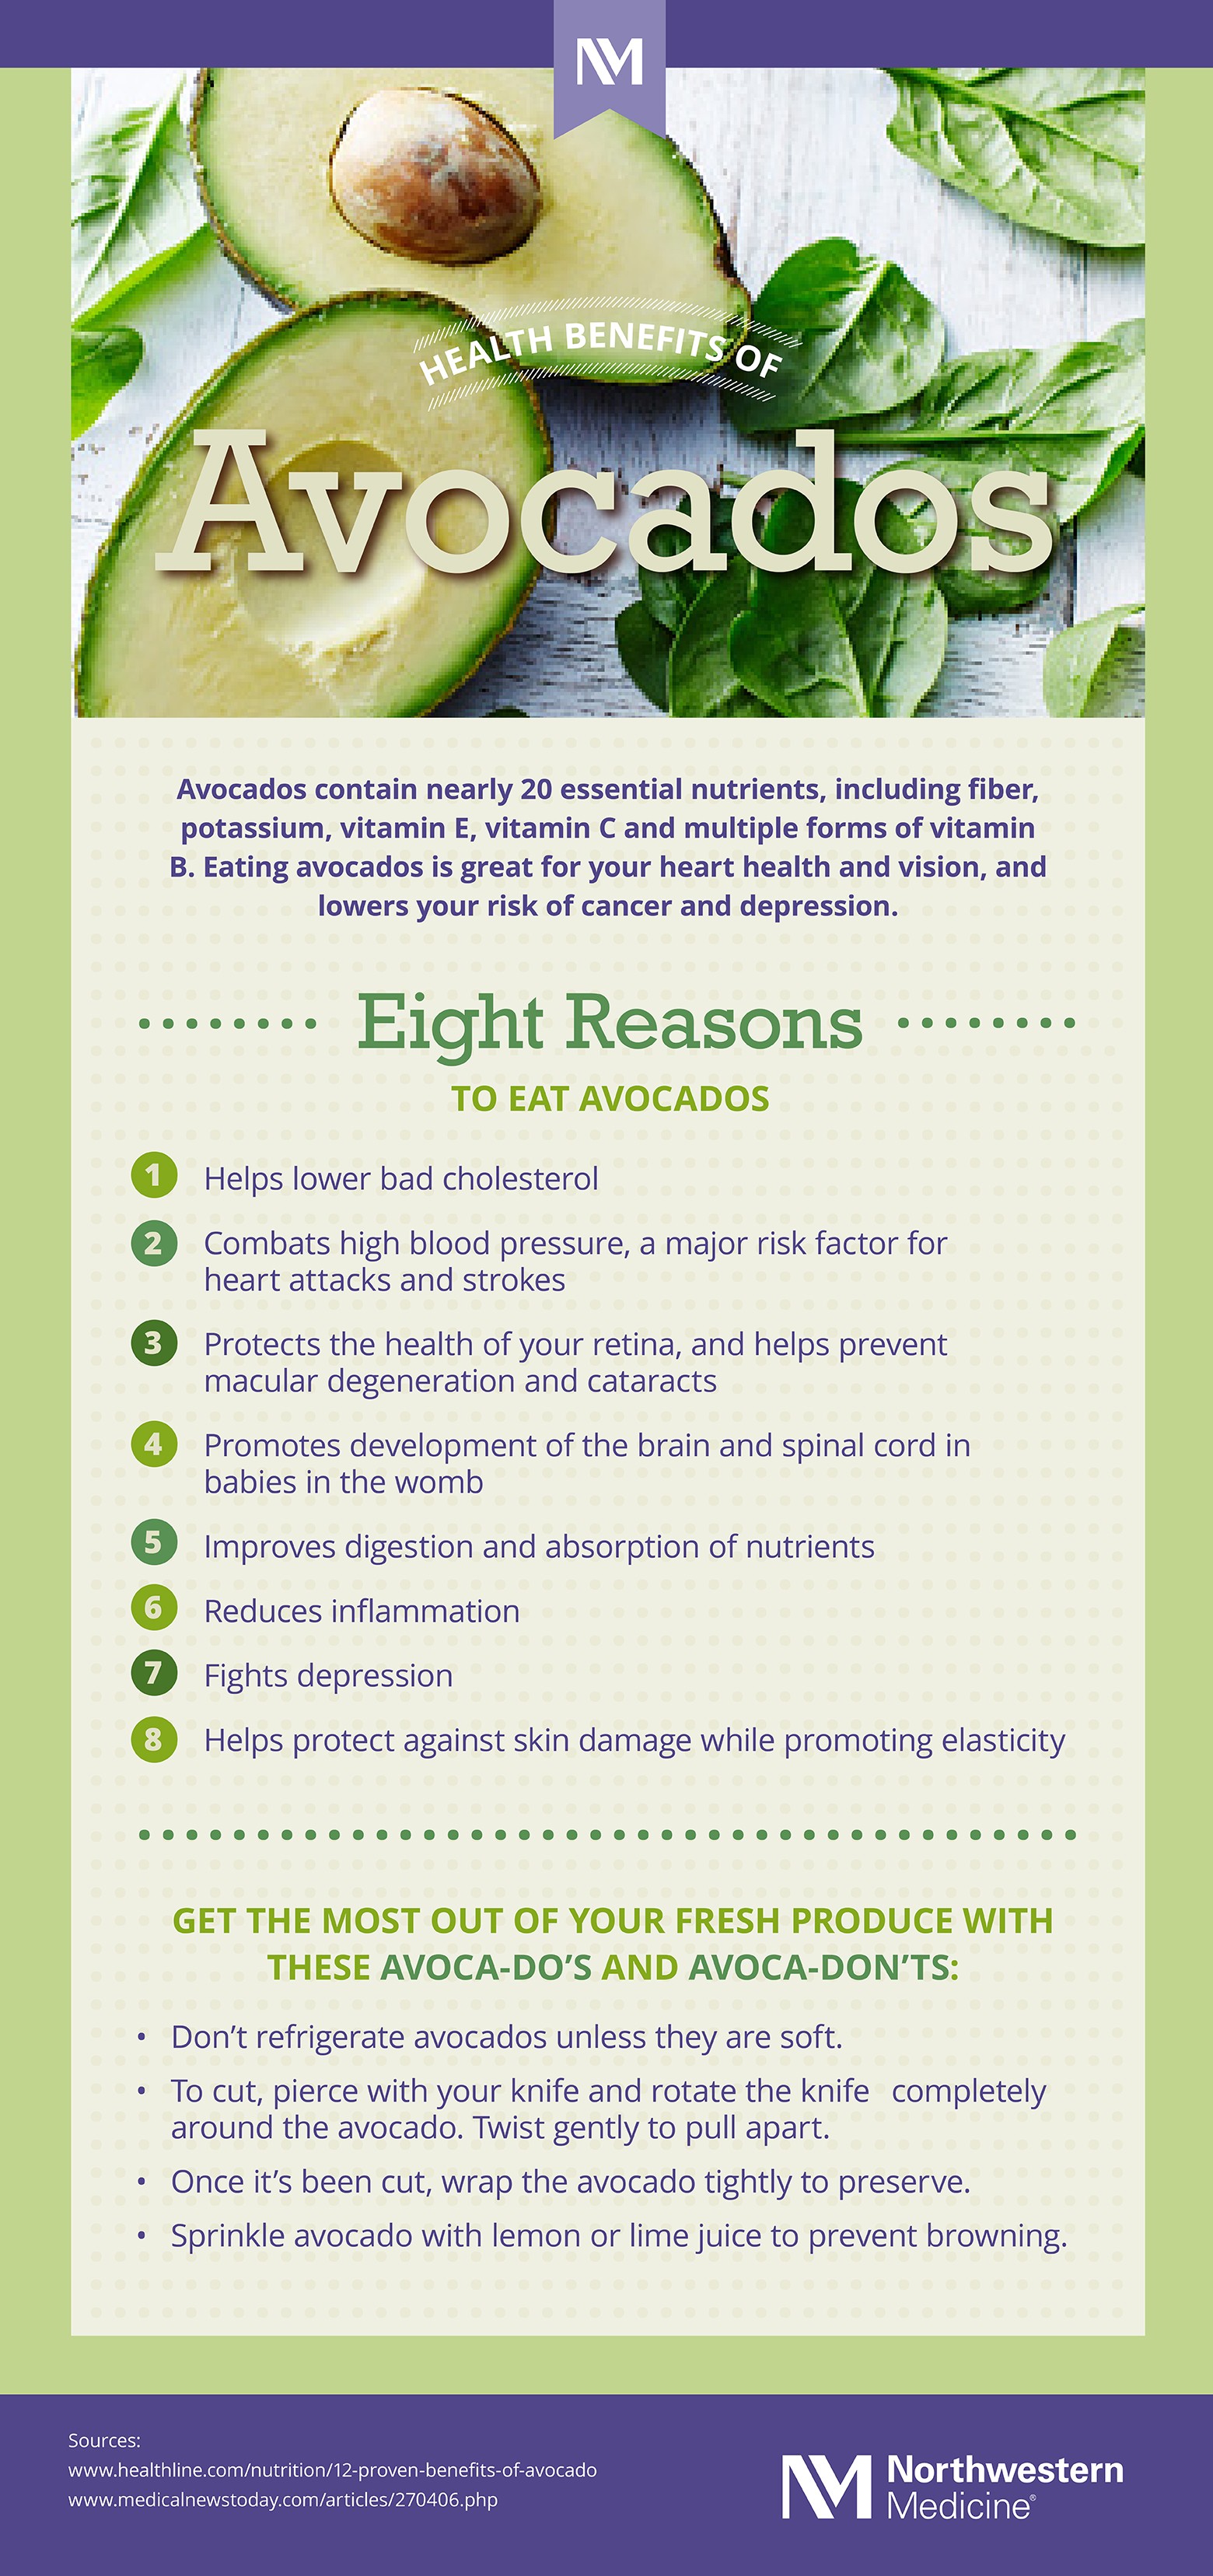 7 Health Benefits Of Avocados & How To Eat Them